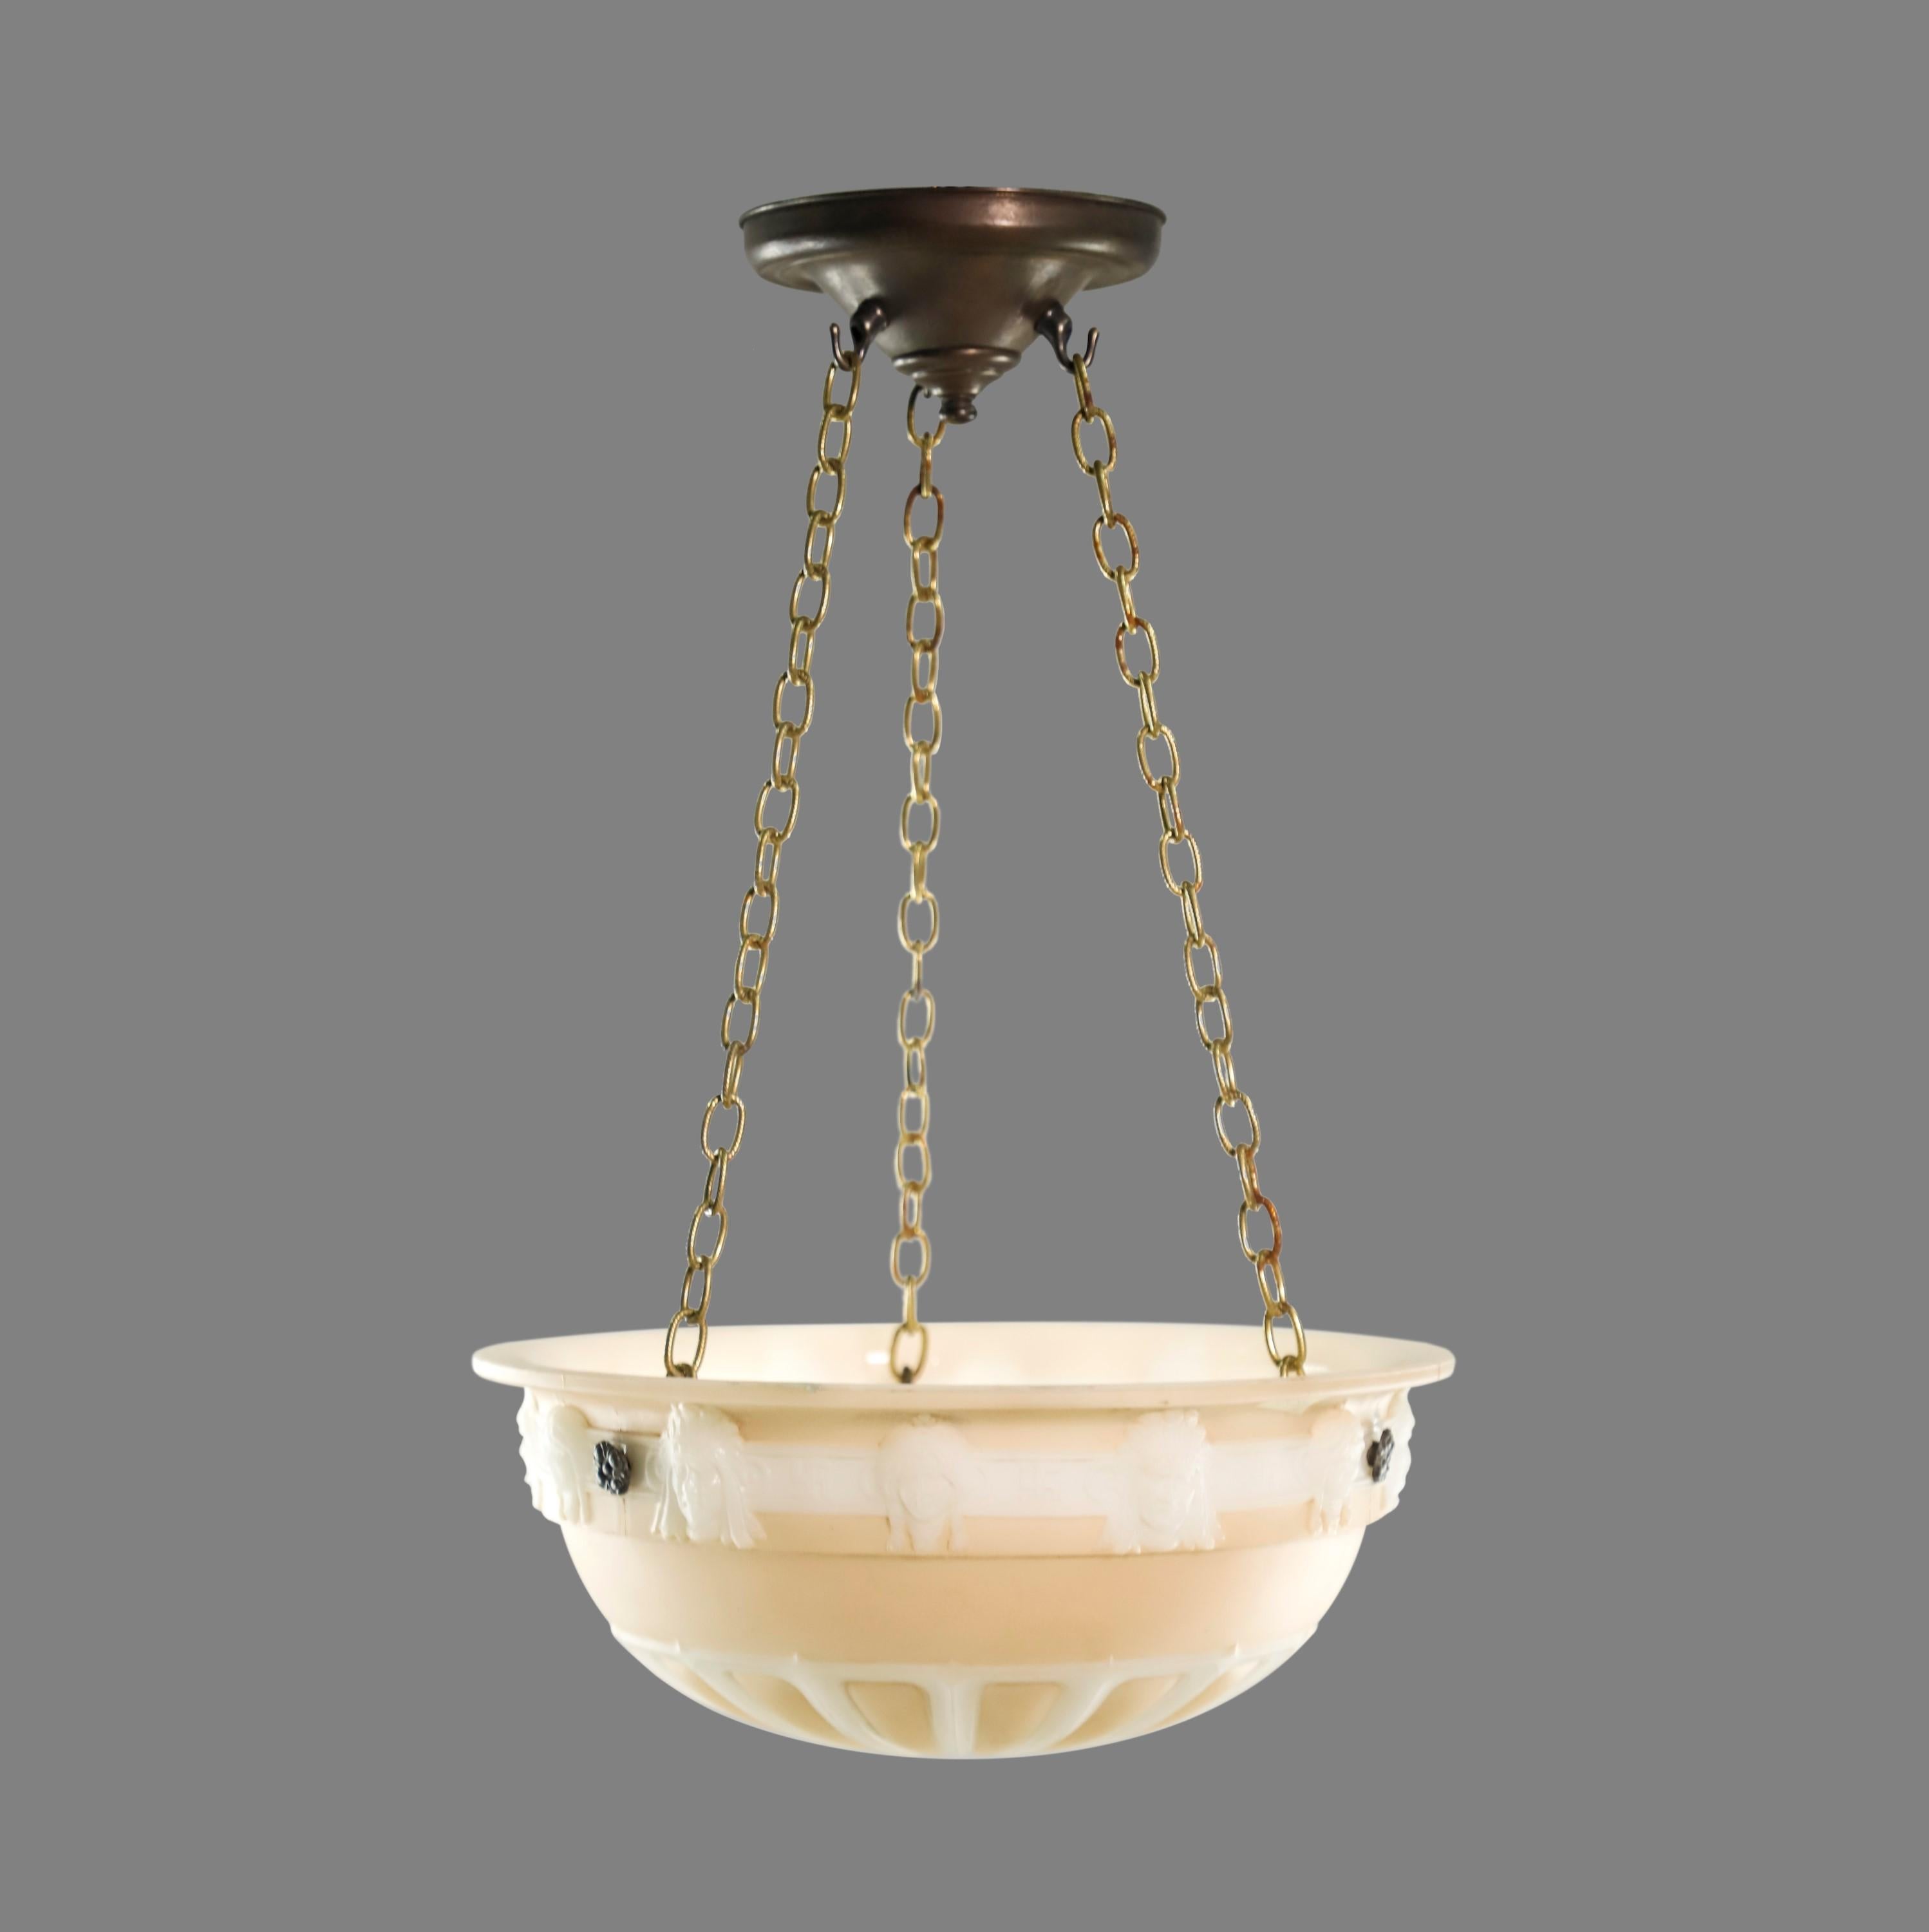 Cast glass beige and white dish pendant light with figural female heads suspended from three chains with a brass fitter. Cleaned and restored. This is in good condition from the Pre-War era. Takes three standard medium base lightbulbs. Please note,